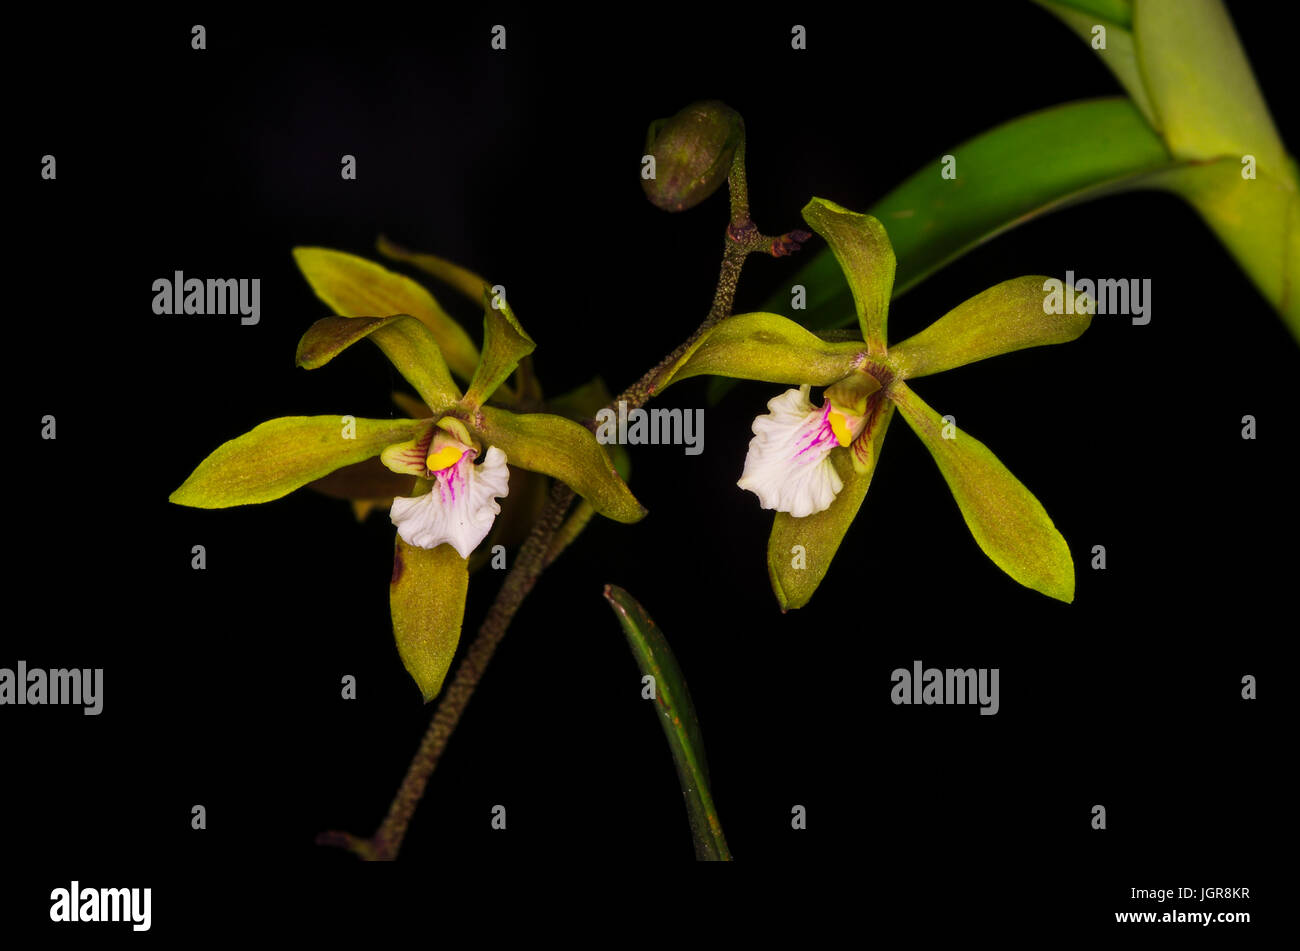 Encyclia tampensis or Tampa Butterfly Orchid images taken in Panama Stock Photo